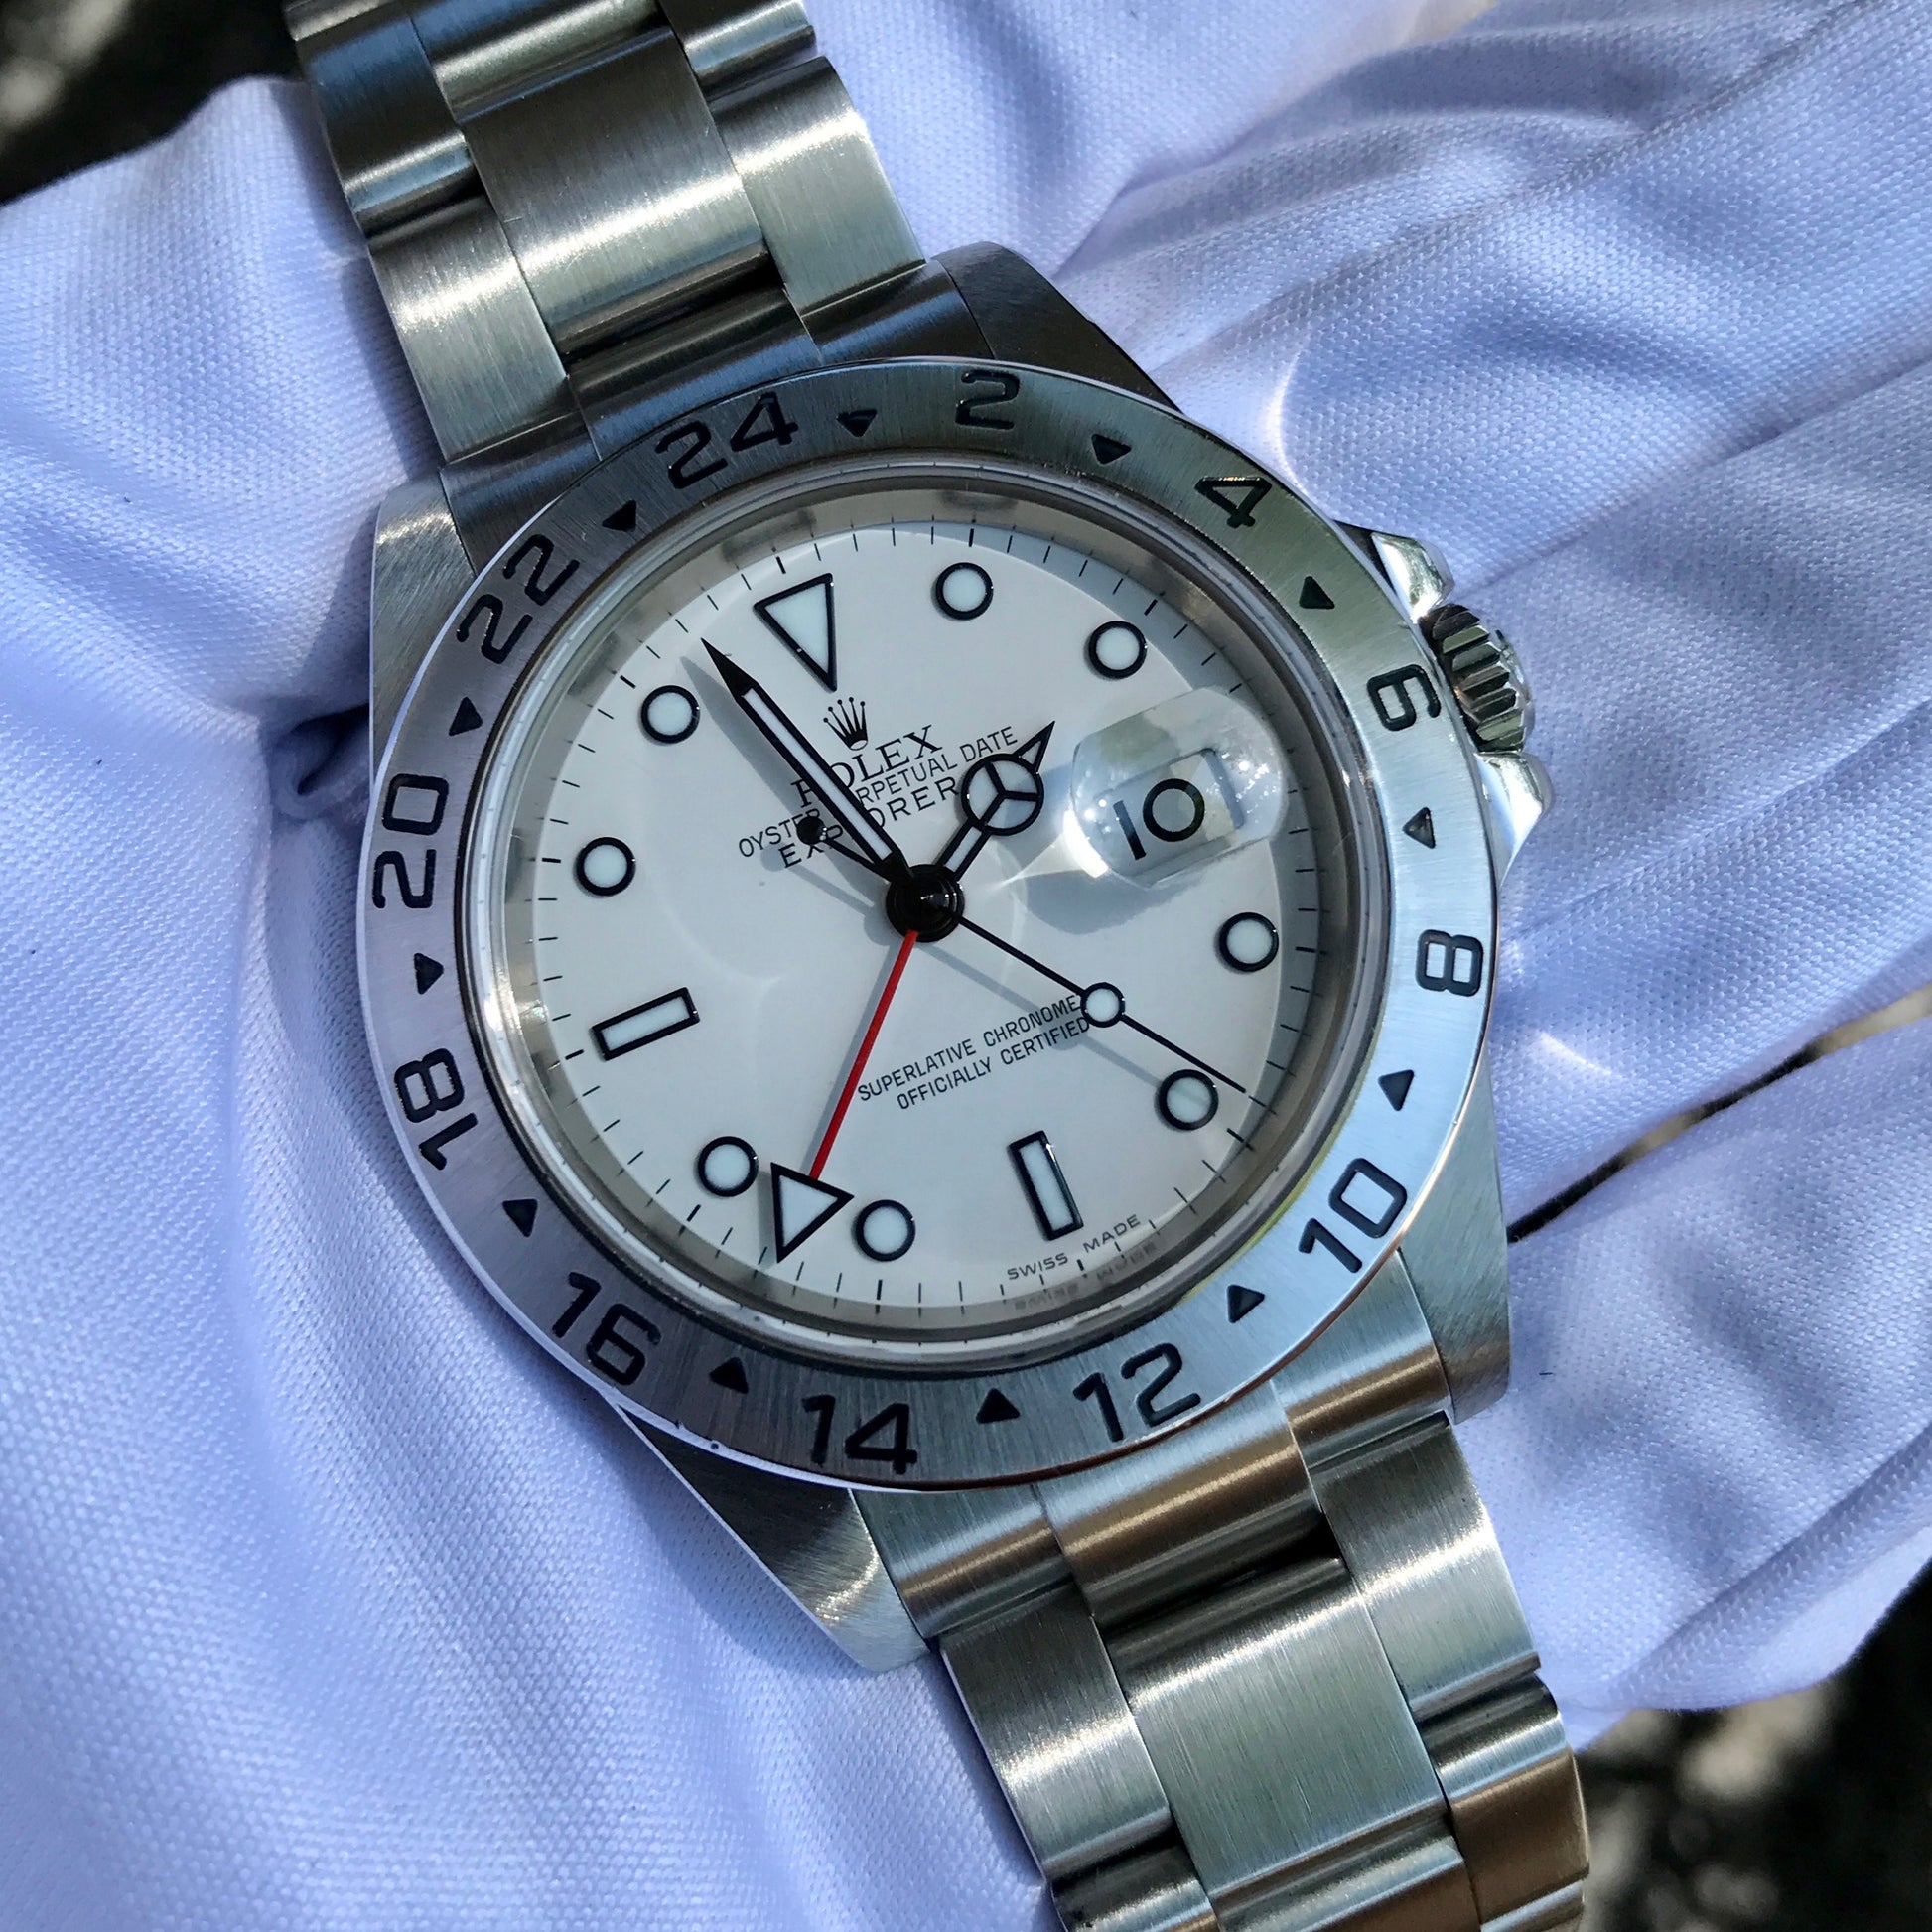 Rolex Explorer II 16570 Stainless Steel GMT Oyster "Z" Serial No Holes Automatic Wristwatch Box & Papers - Hashtag Watch Company